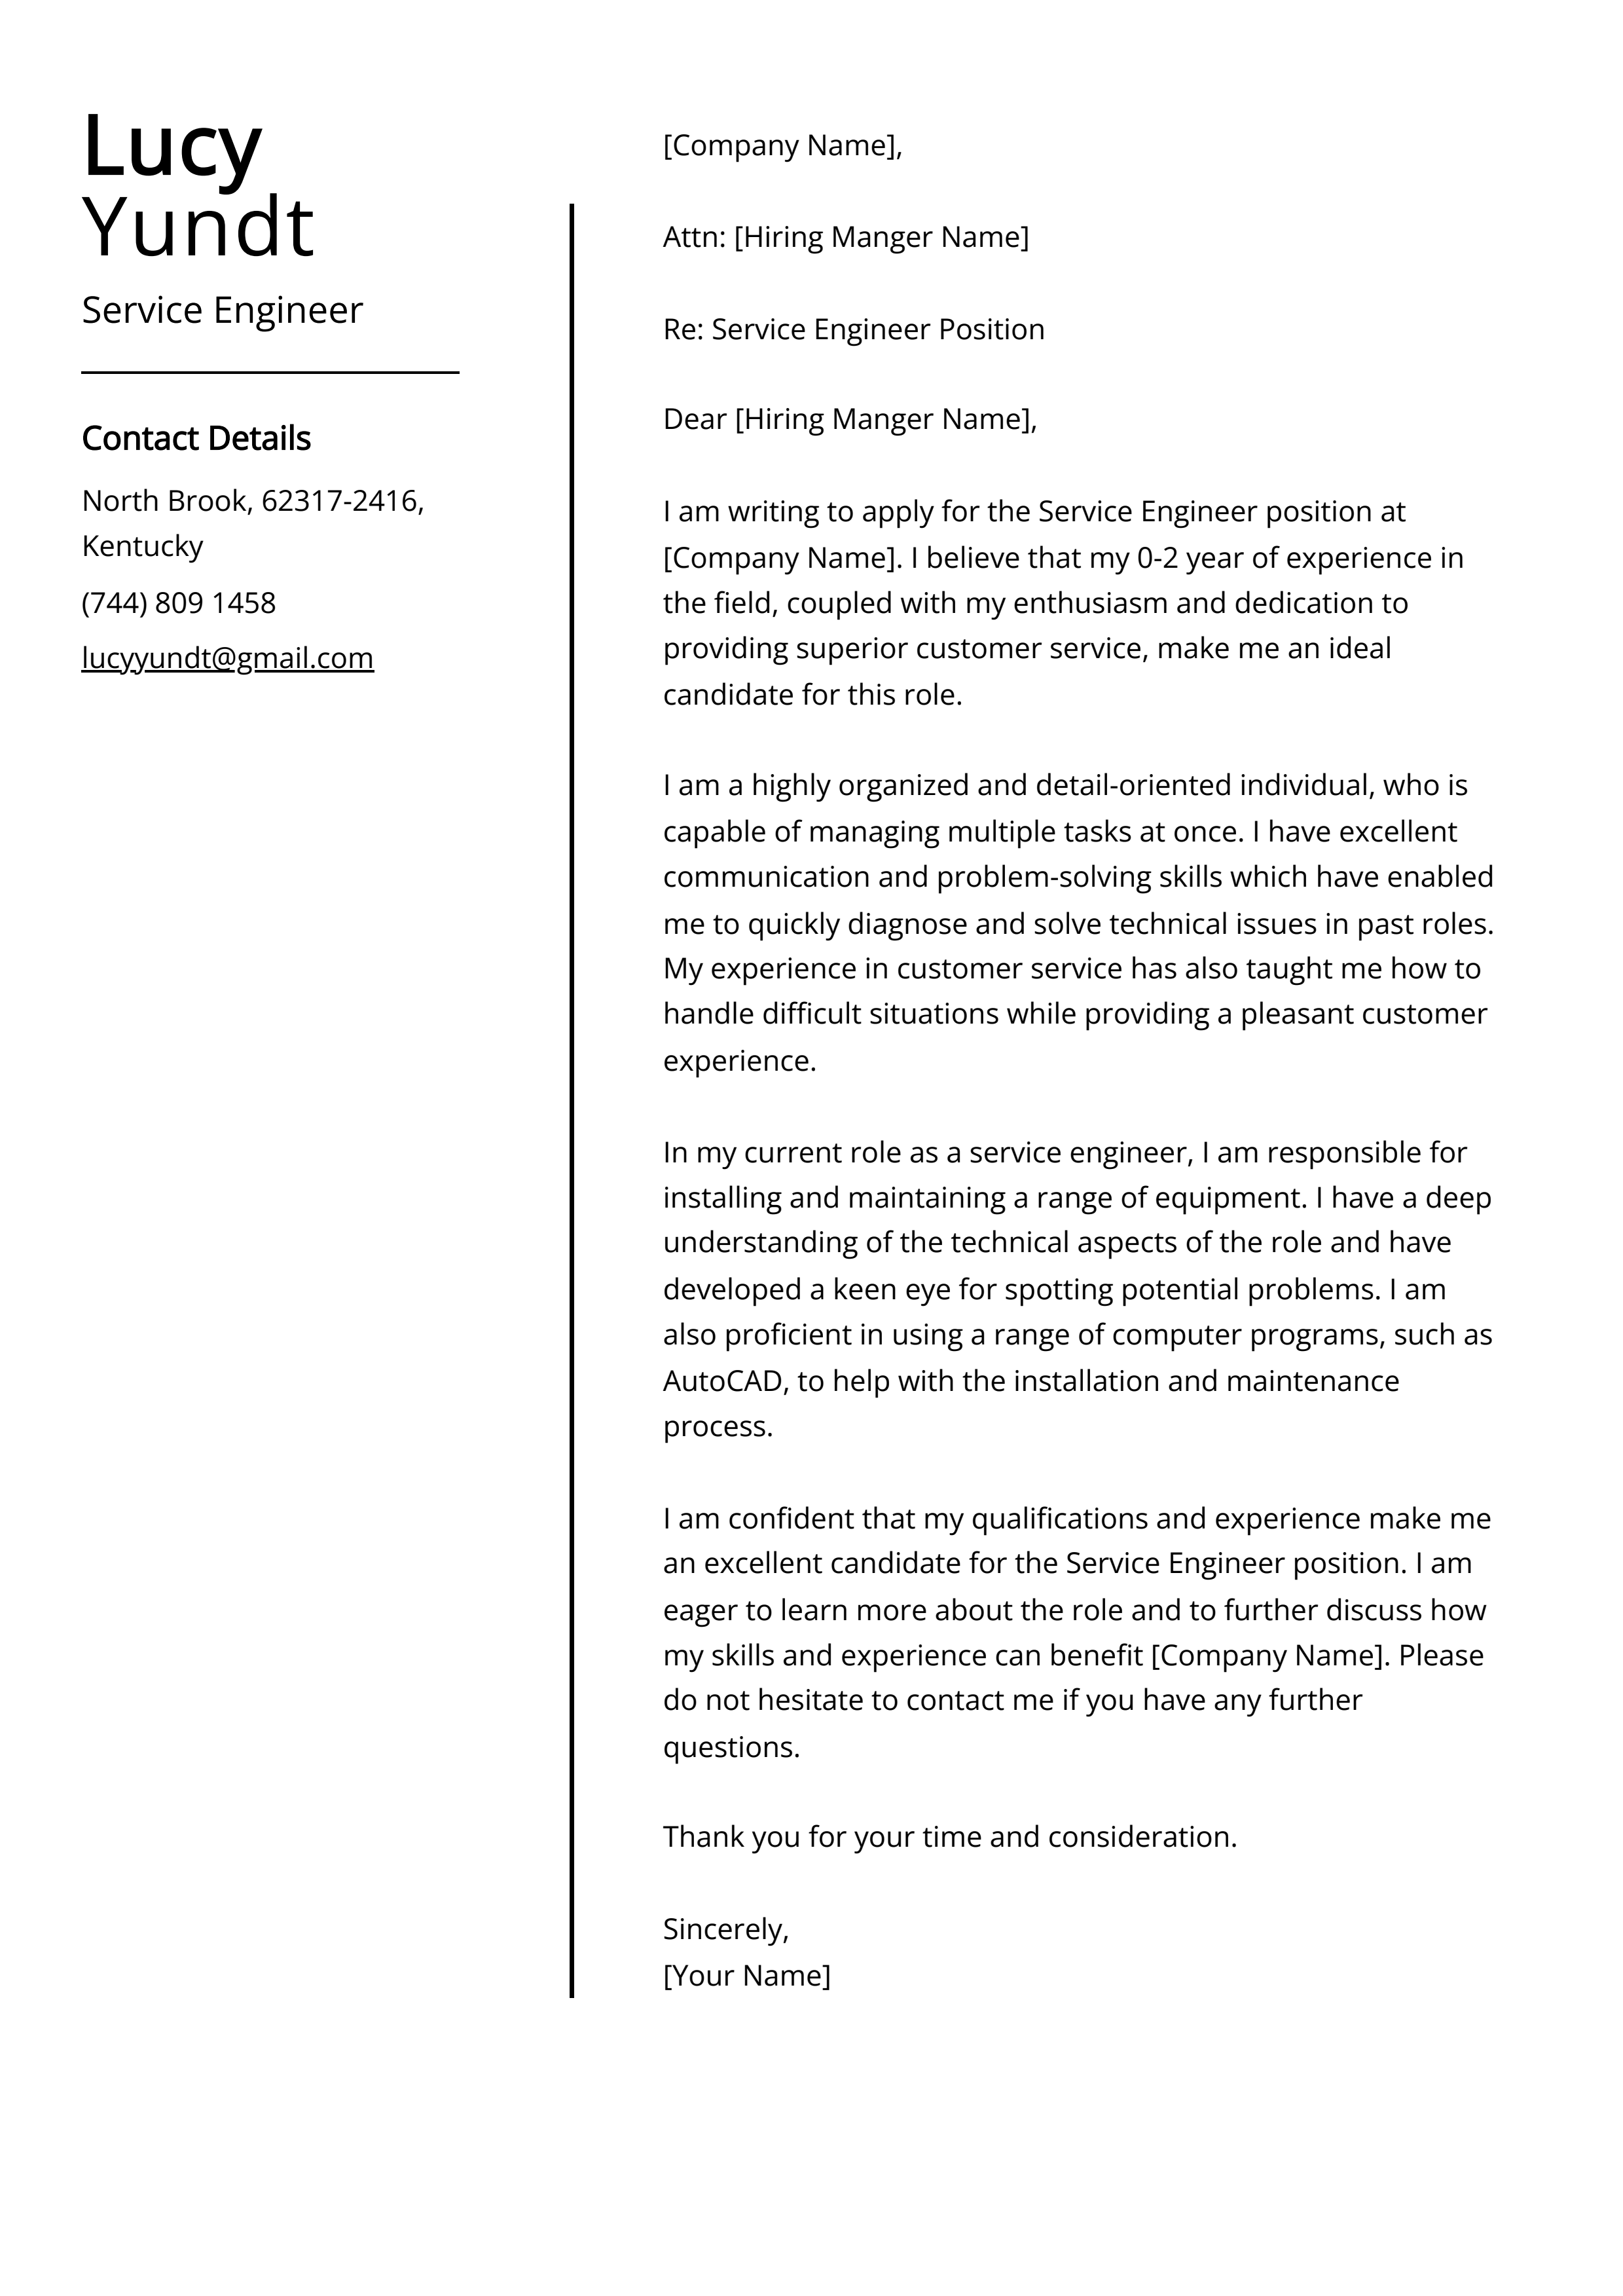 Service Engineer Cover Letter Example